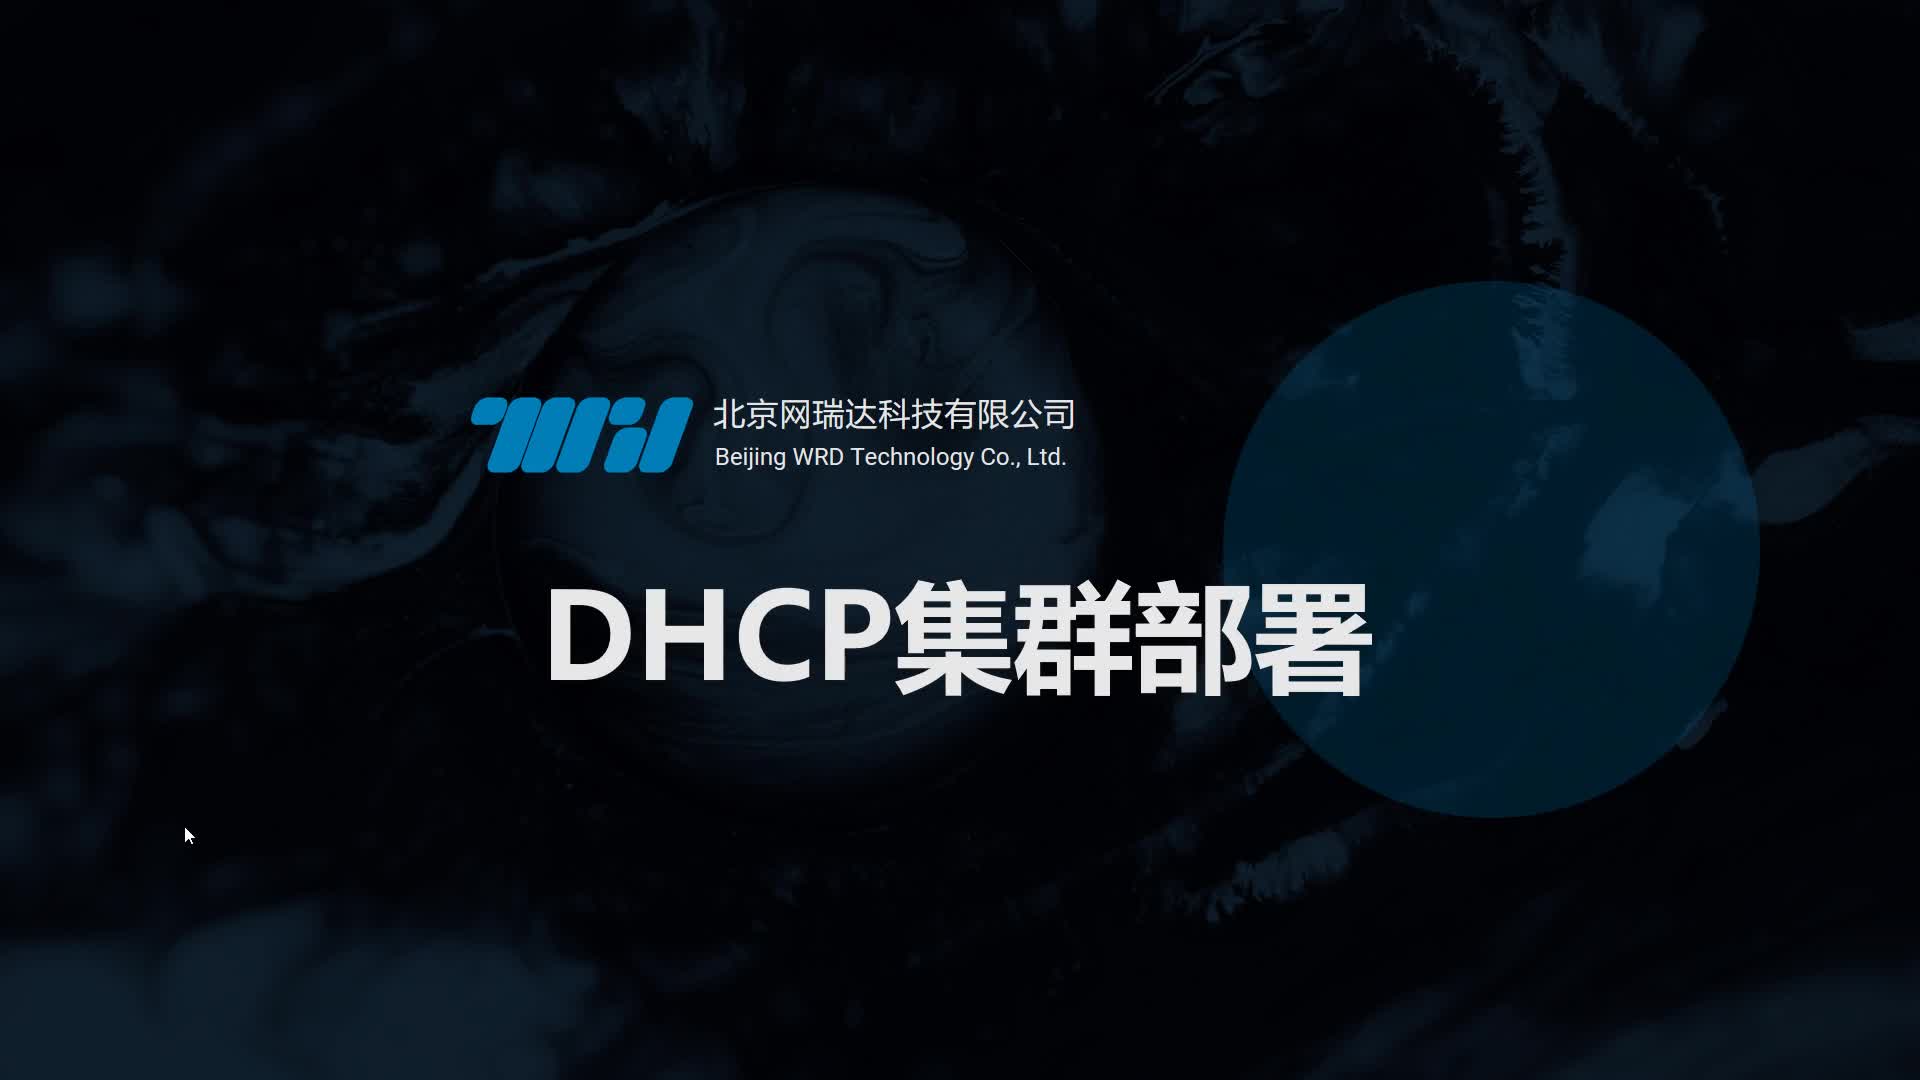 160-DHCP-DHCP集群部署